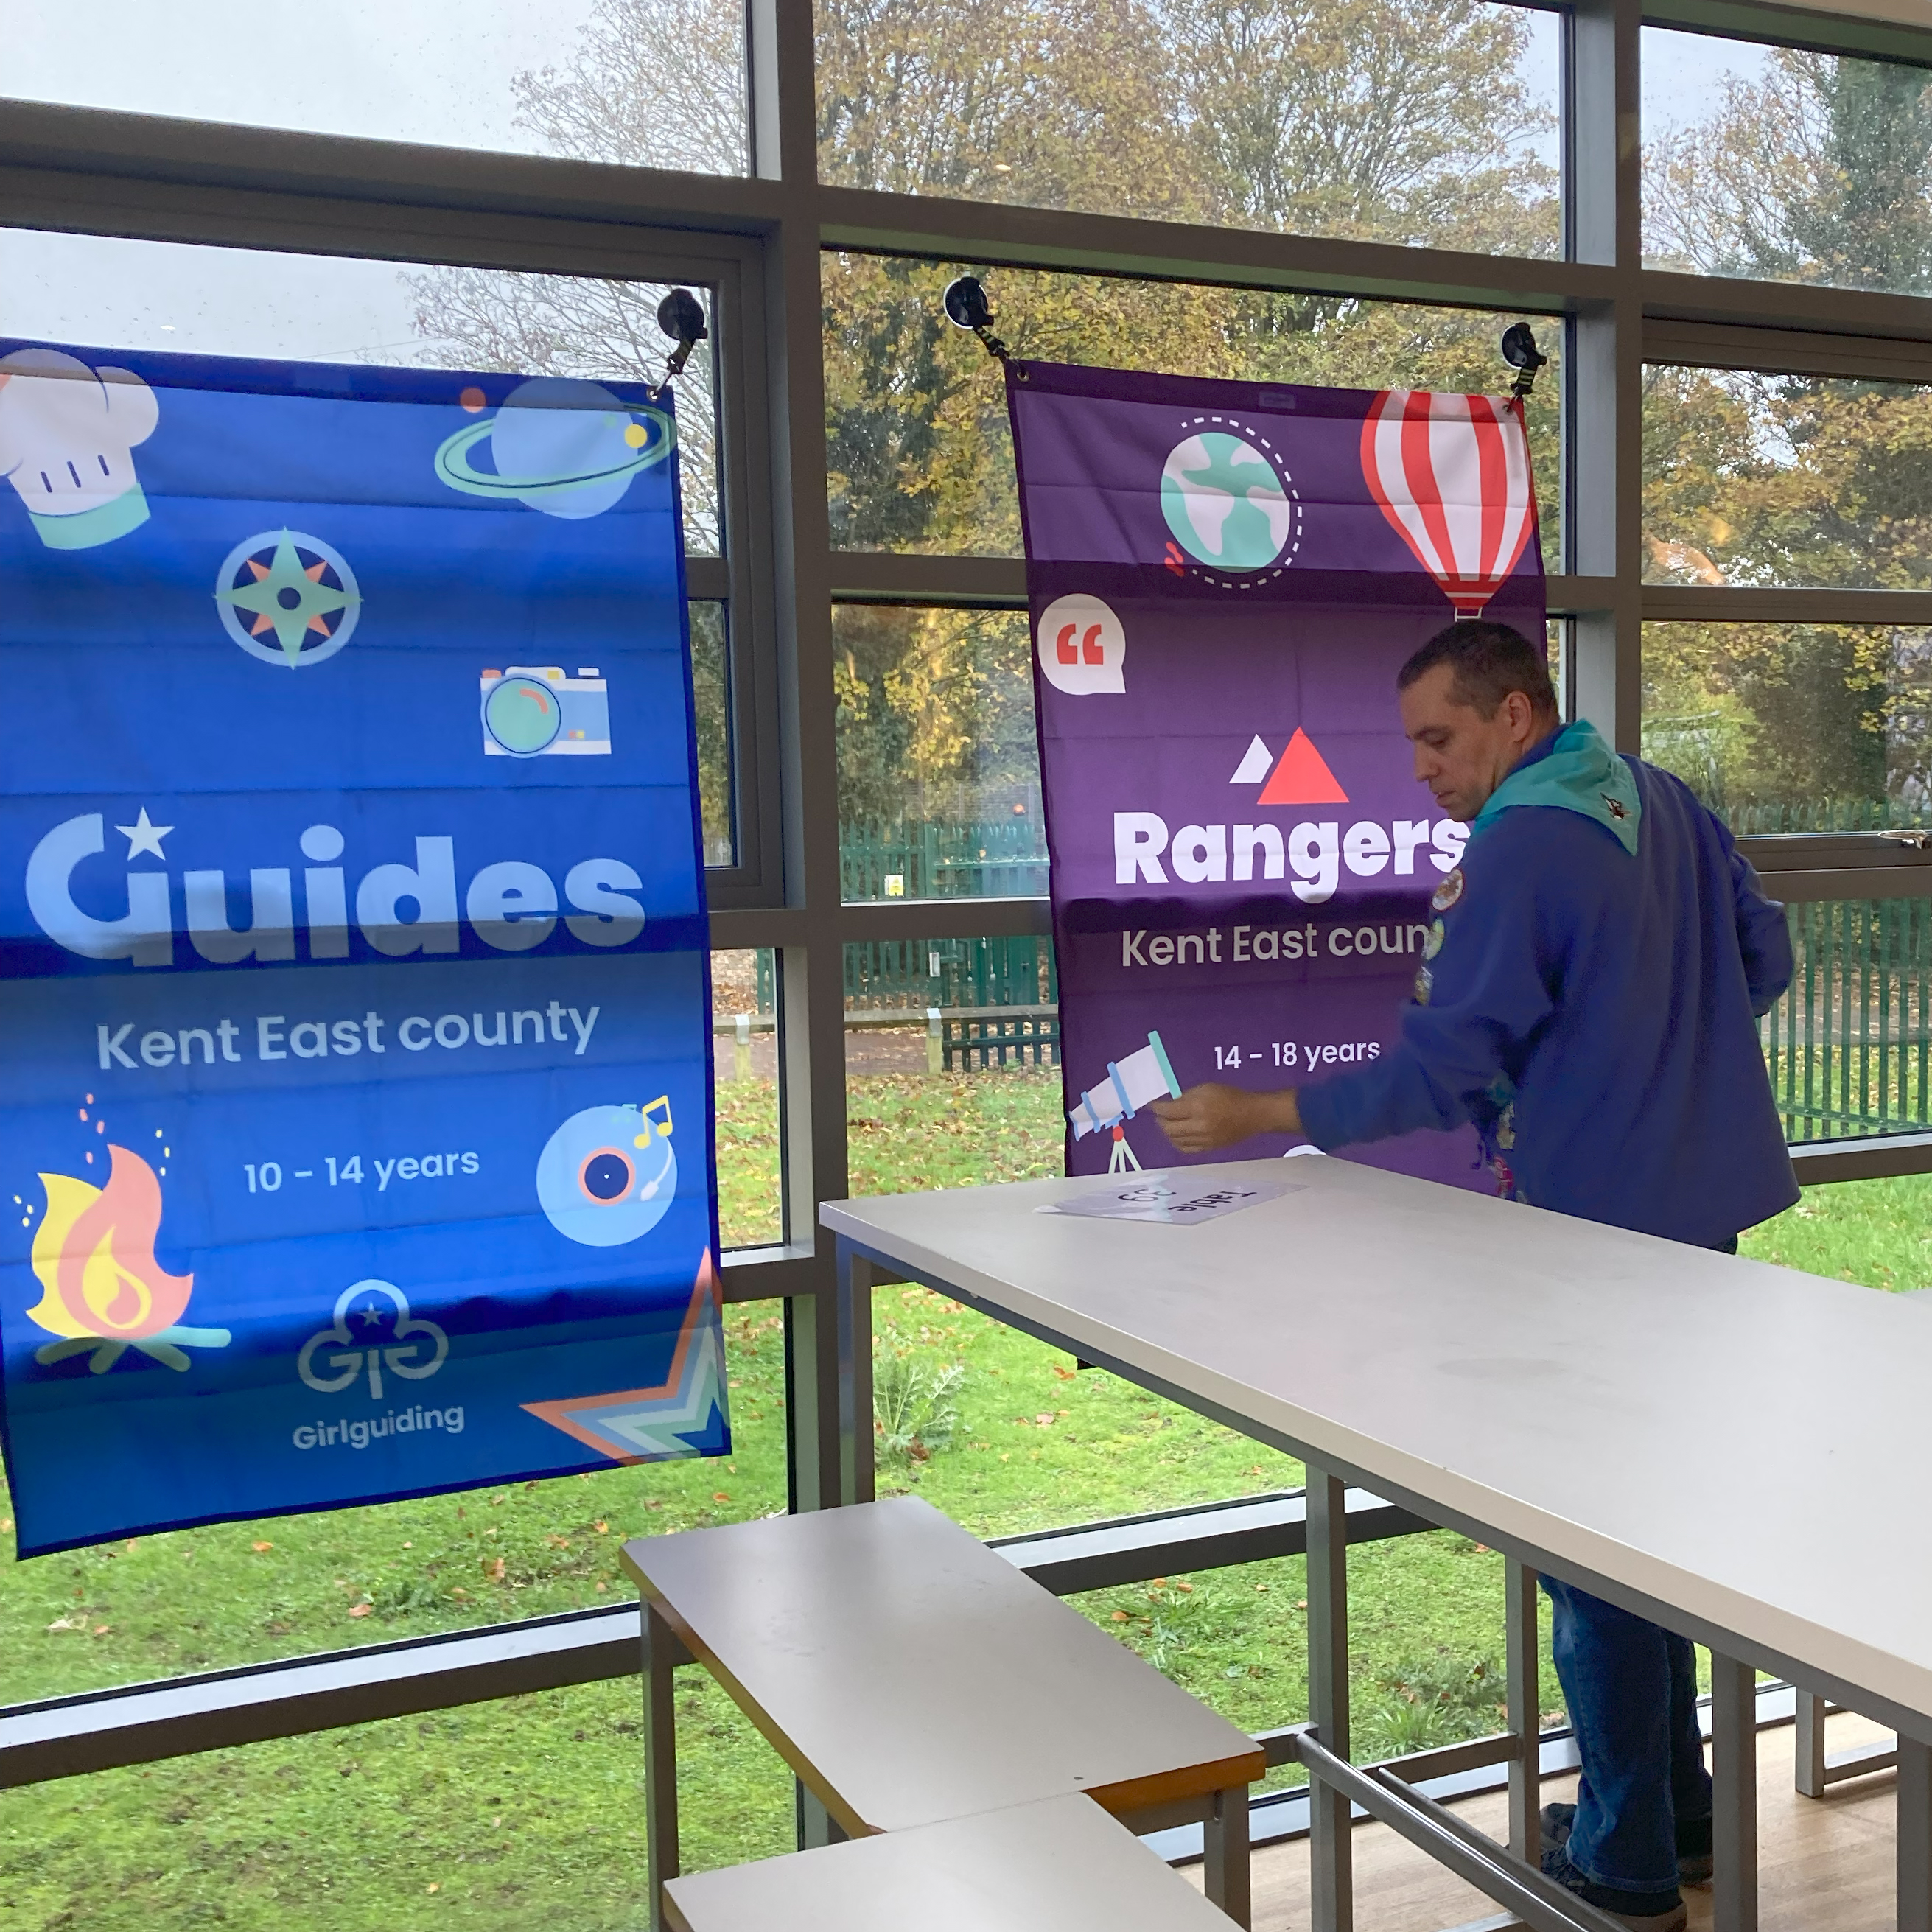 Girlguiding branding. Putting up banners for Guides and Rangers.